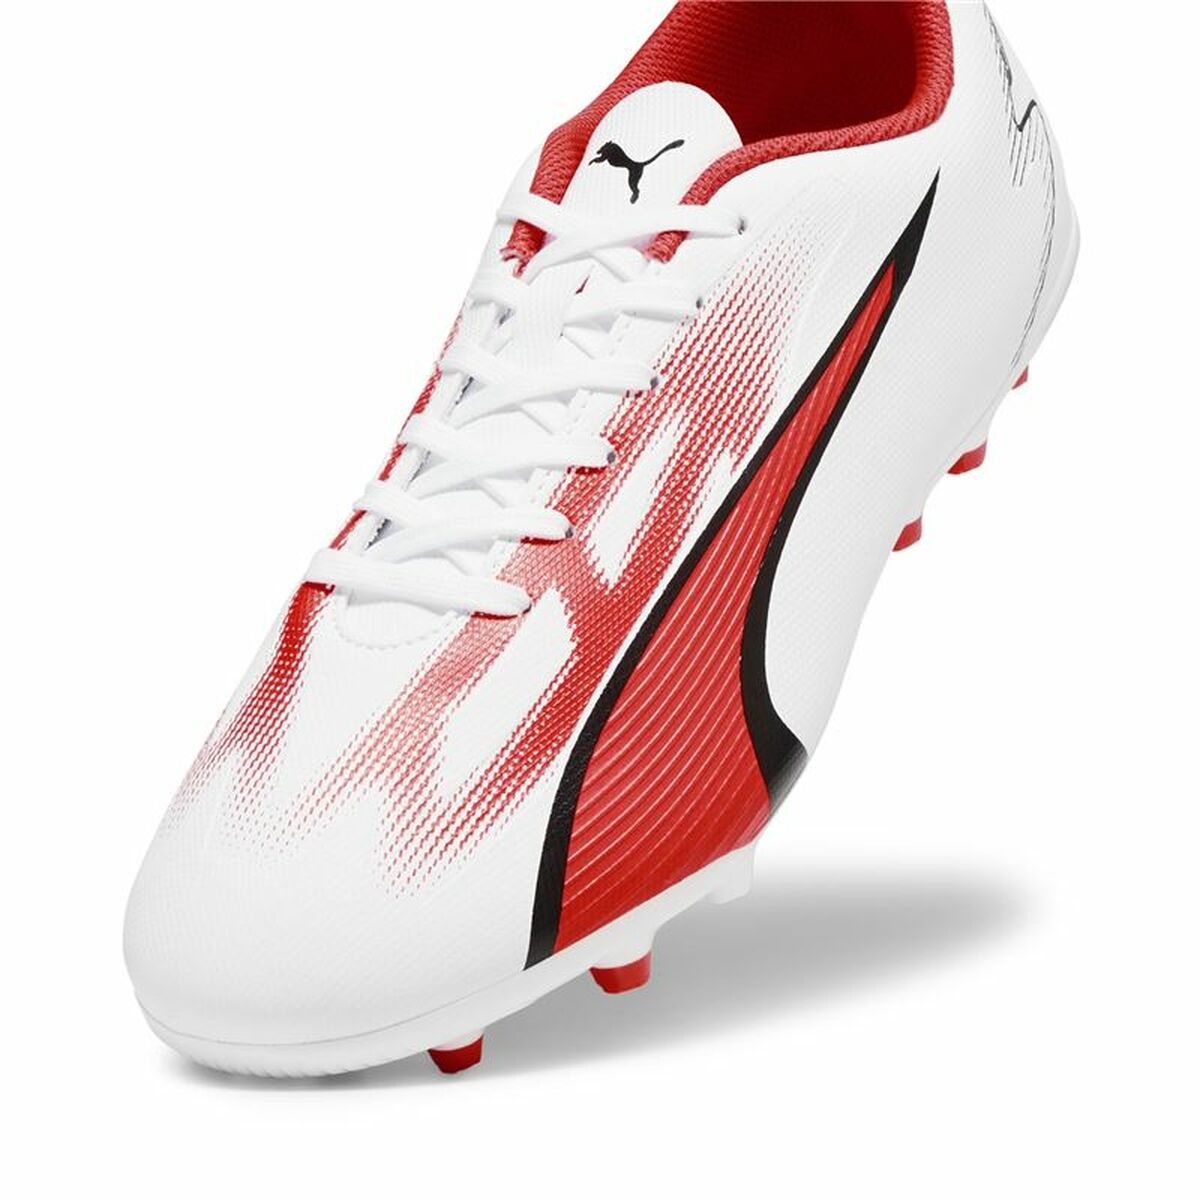 Chaussures de Football pour Adultes Puma Ultra Play MG Blanc Rouge